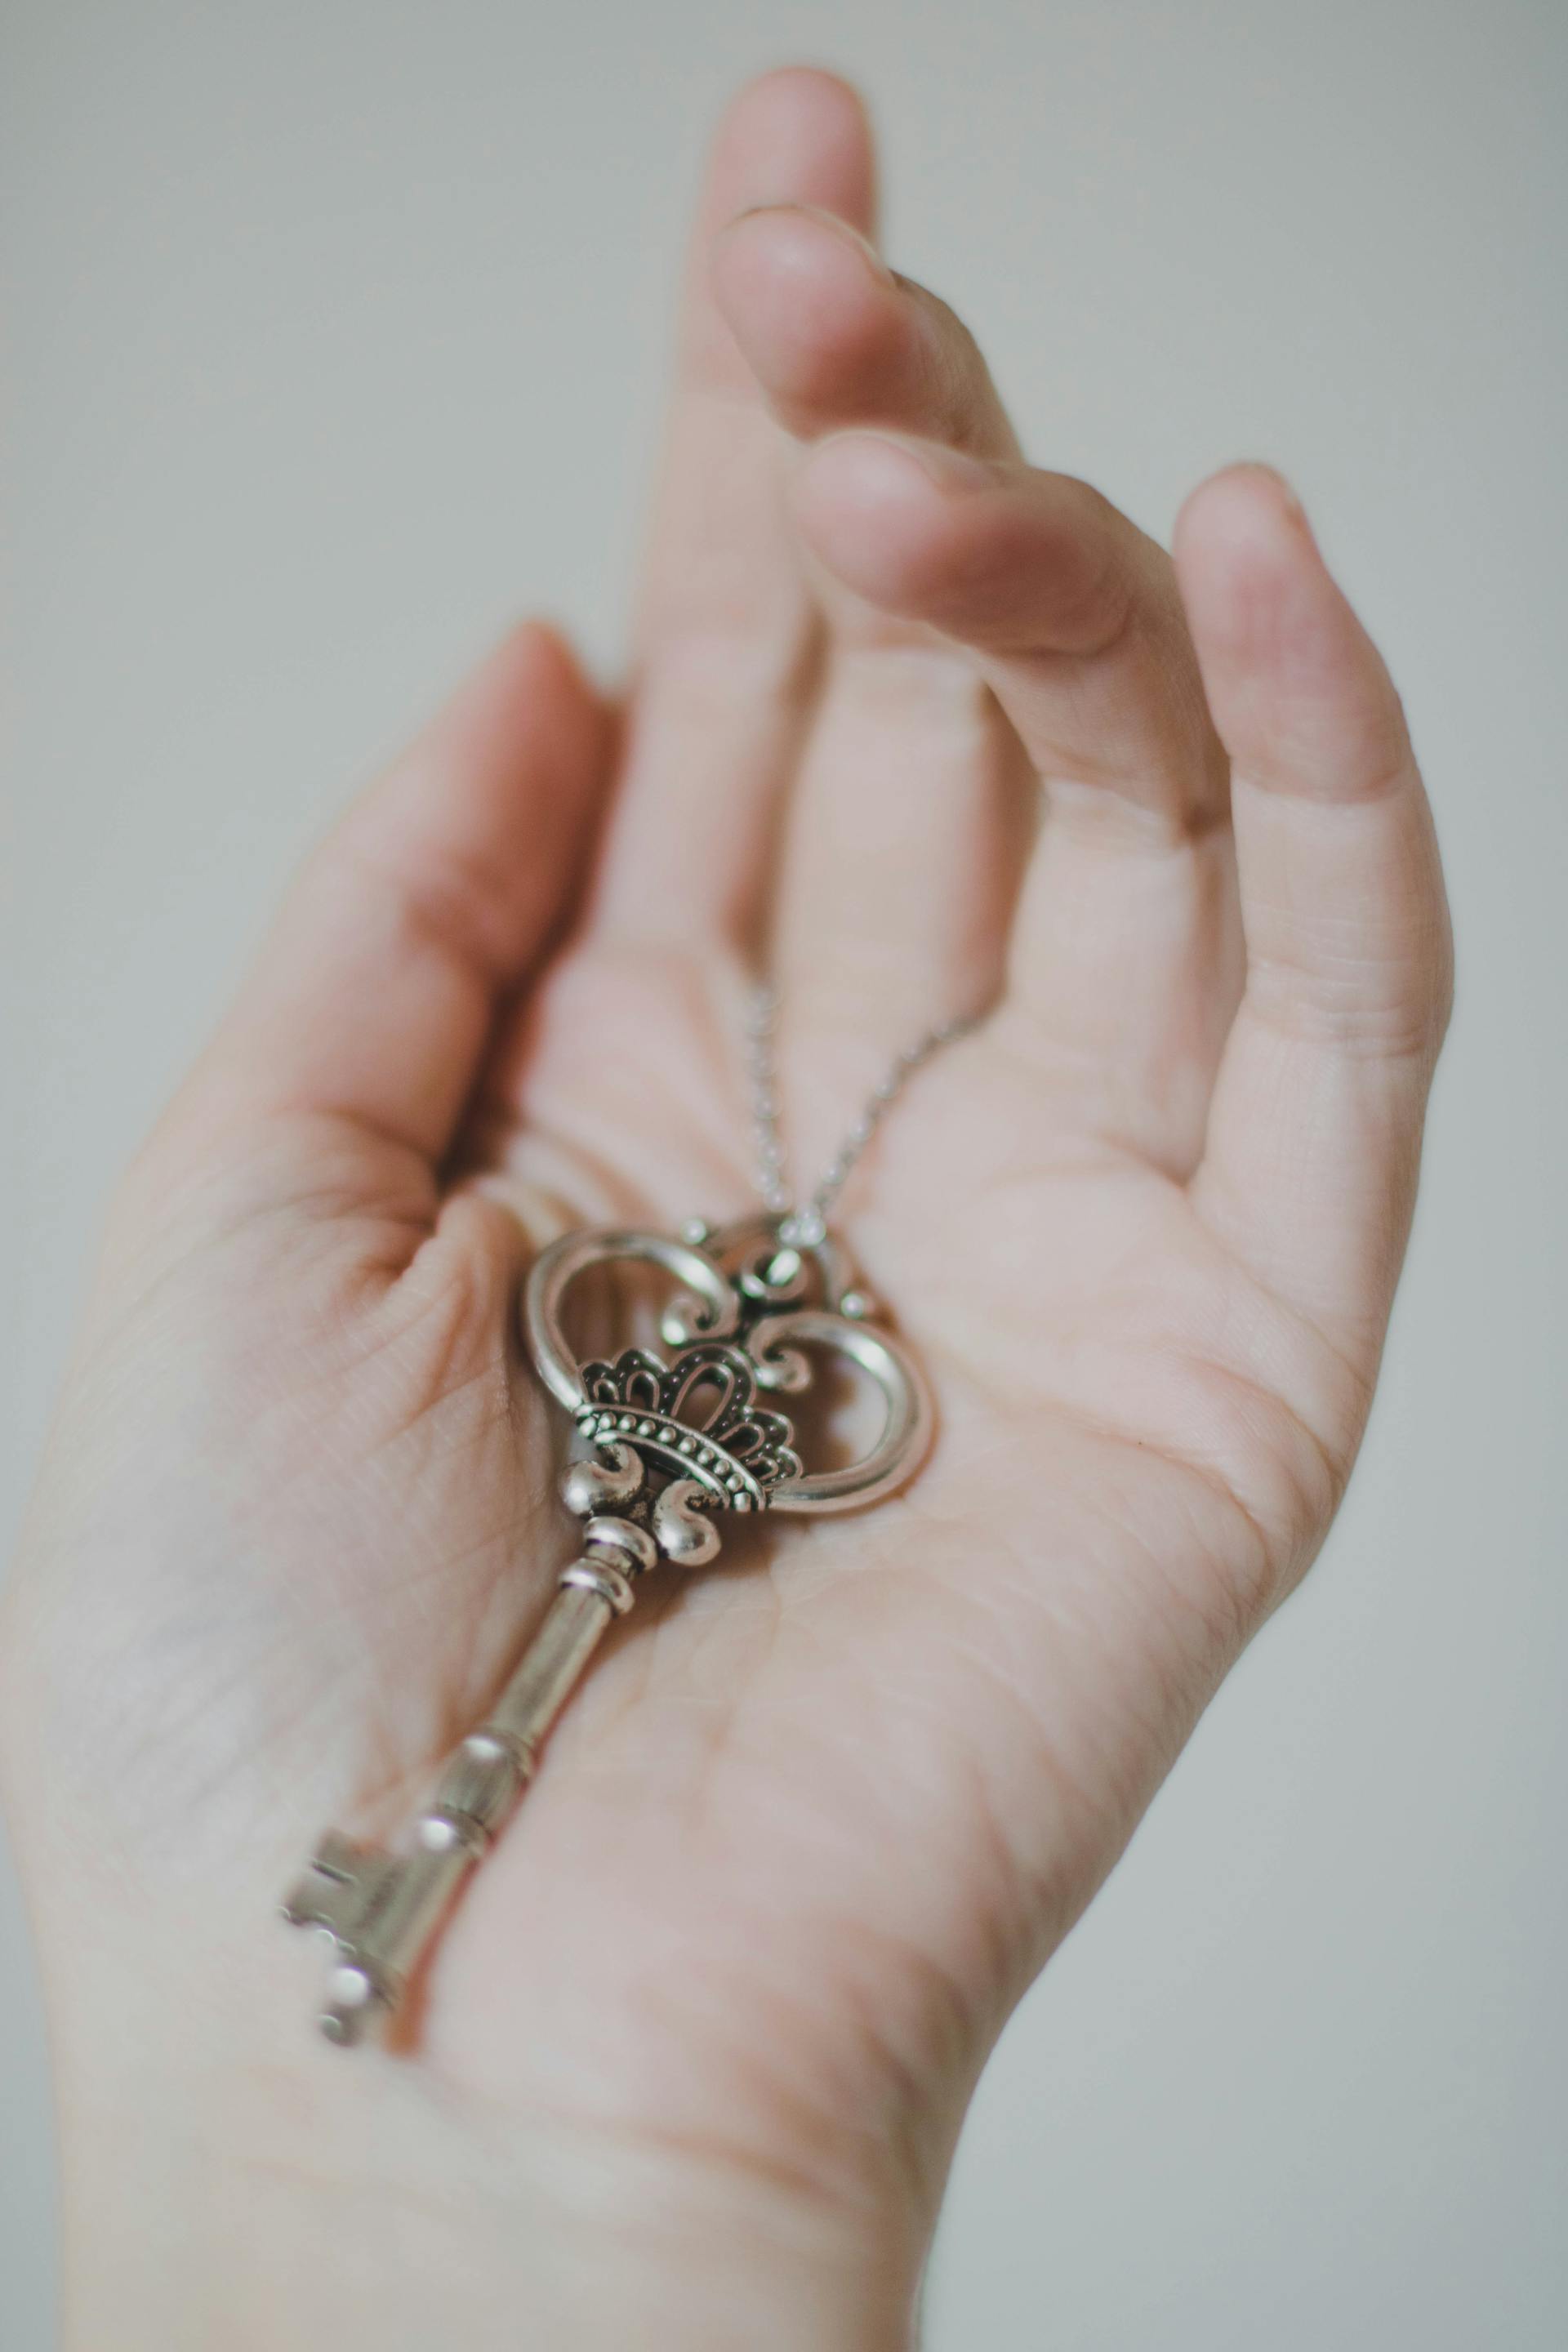 A person holding a silver-colored skeleton key | Source: Pexels